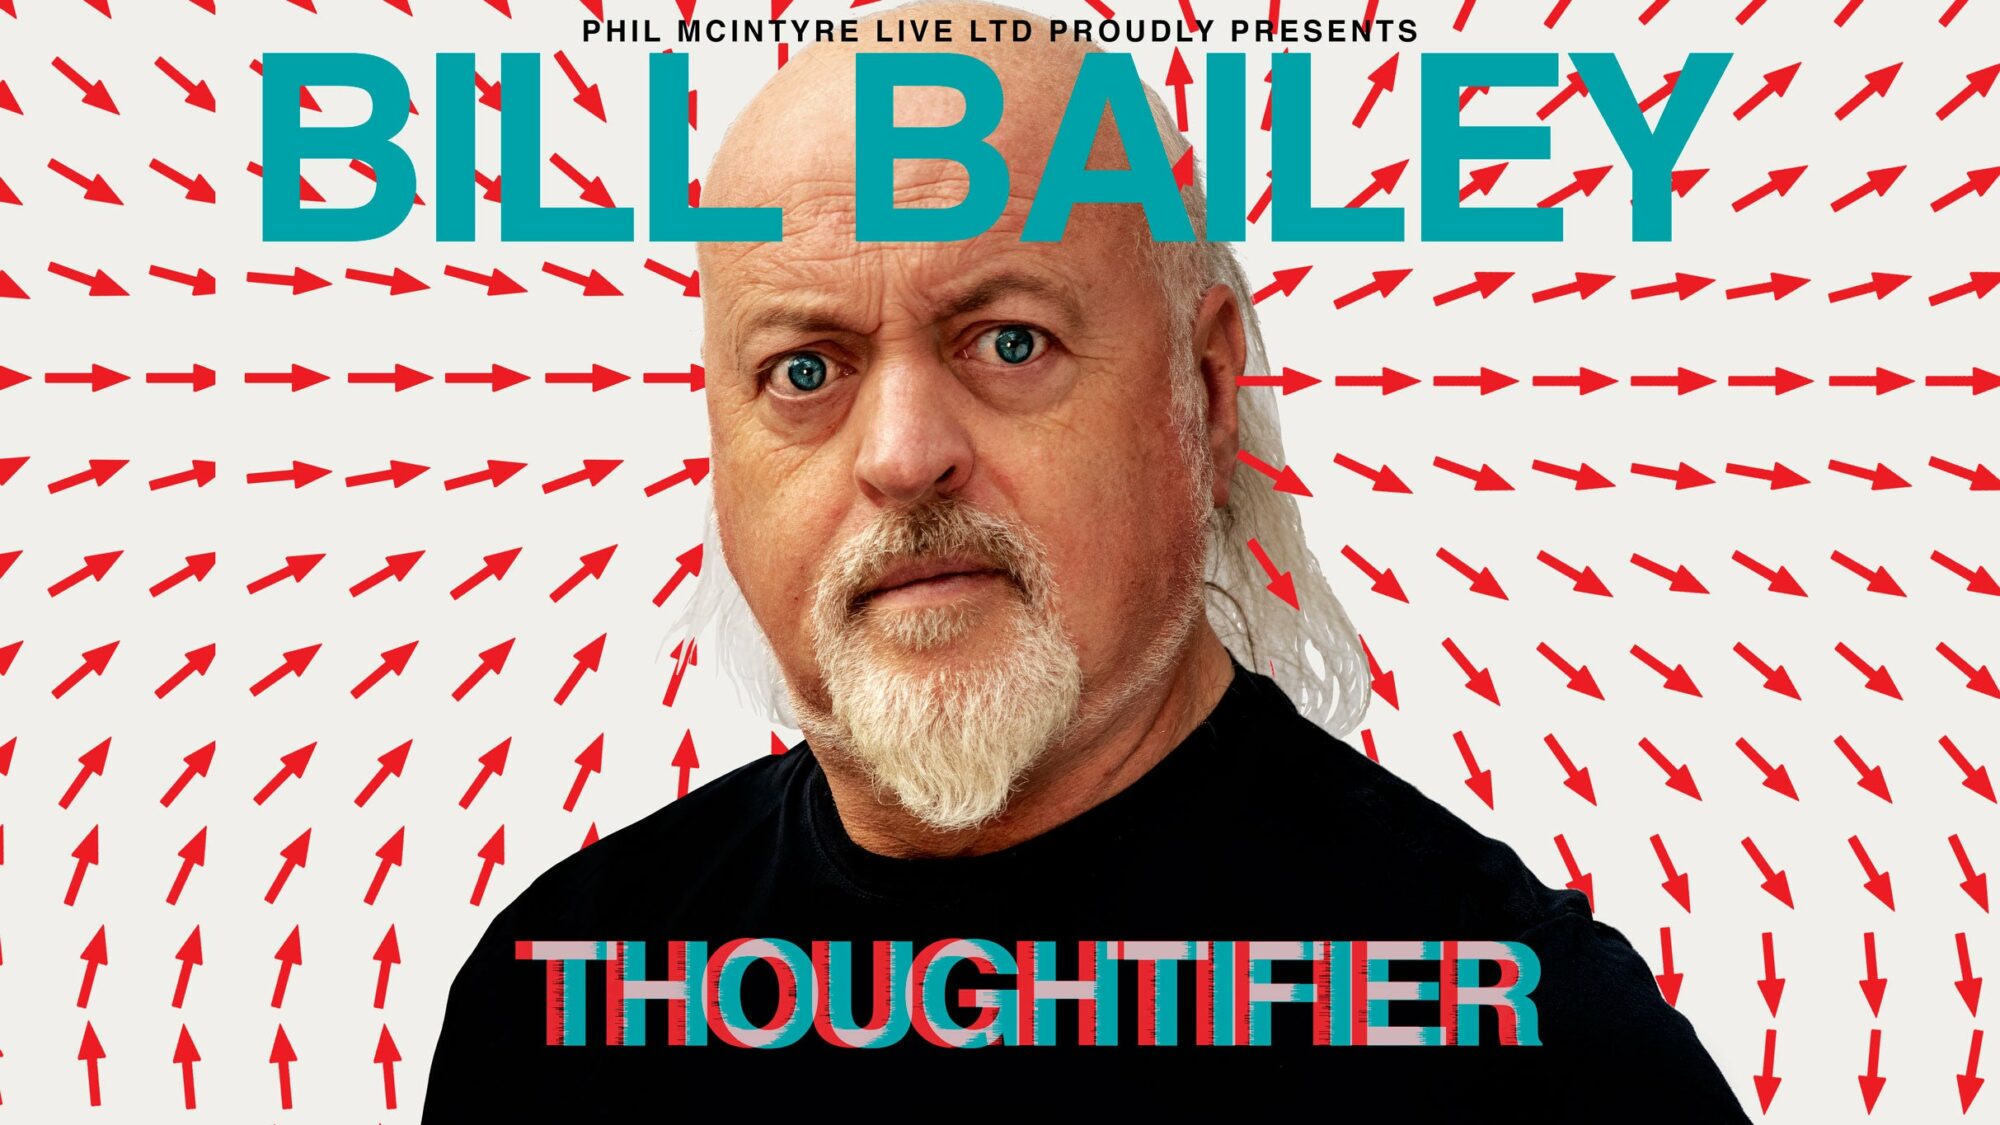 Image name Bill Bailey Thoughtifier at Utilita Arena Sheffield Sheffield the 2 image from the post Bill Bailey: Thoughtifier at Utilita Arena Sheffield, Sheffield in Yorkshire.com.